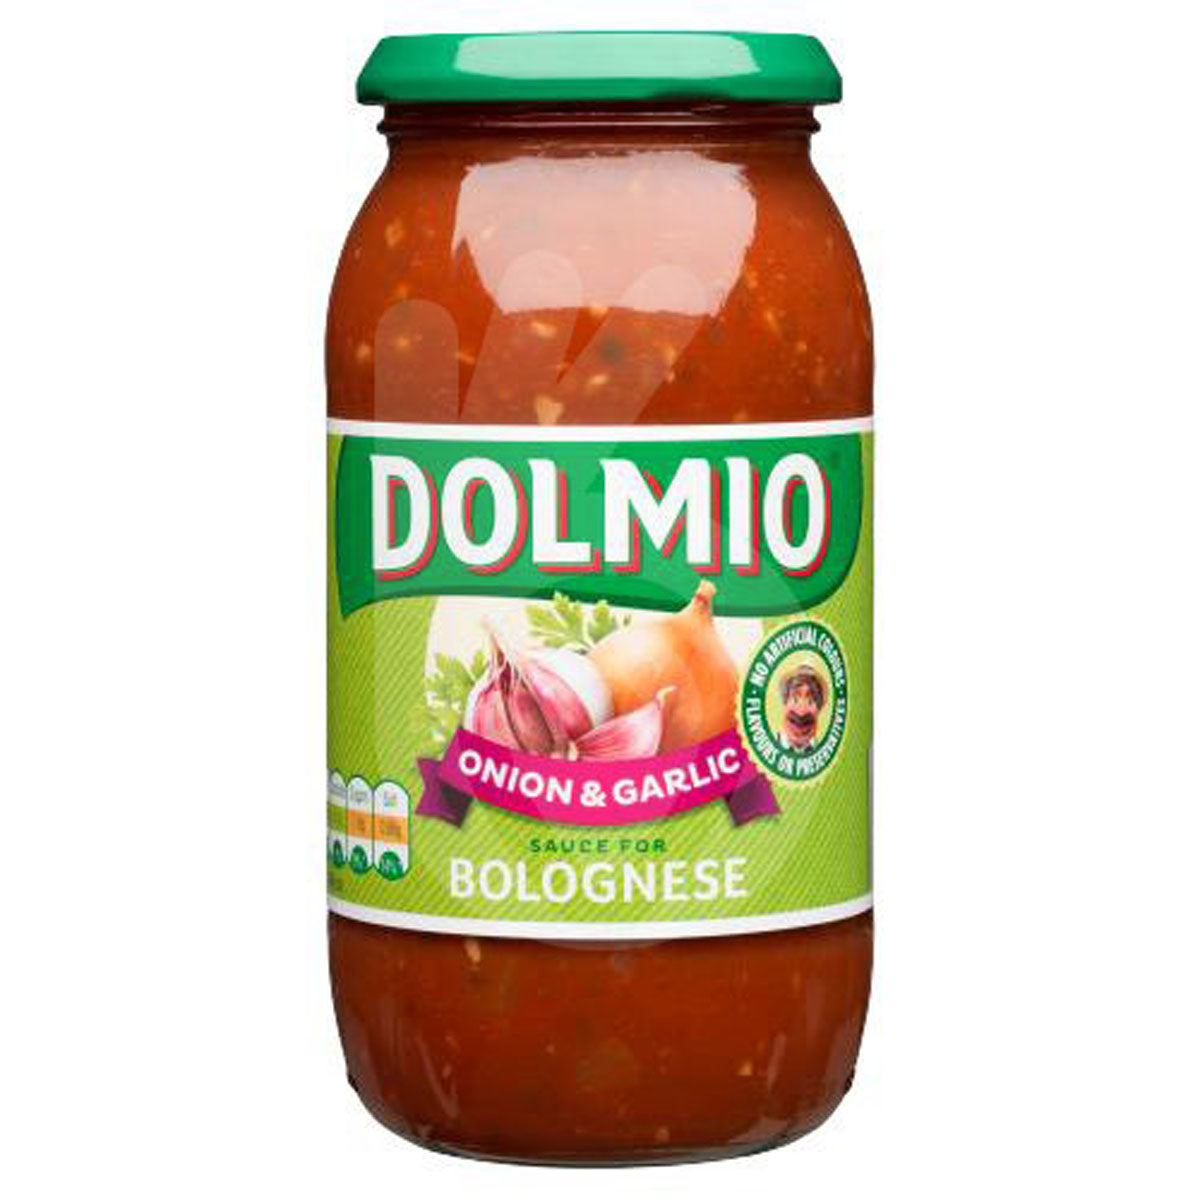 A jar of Dolmio - Bolognese Onion and Garlic Pasta Sauce - 500g.